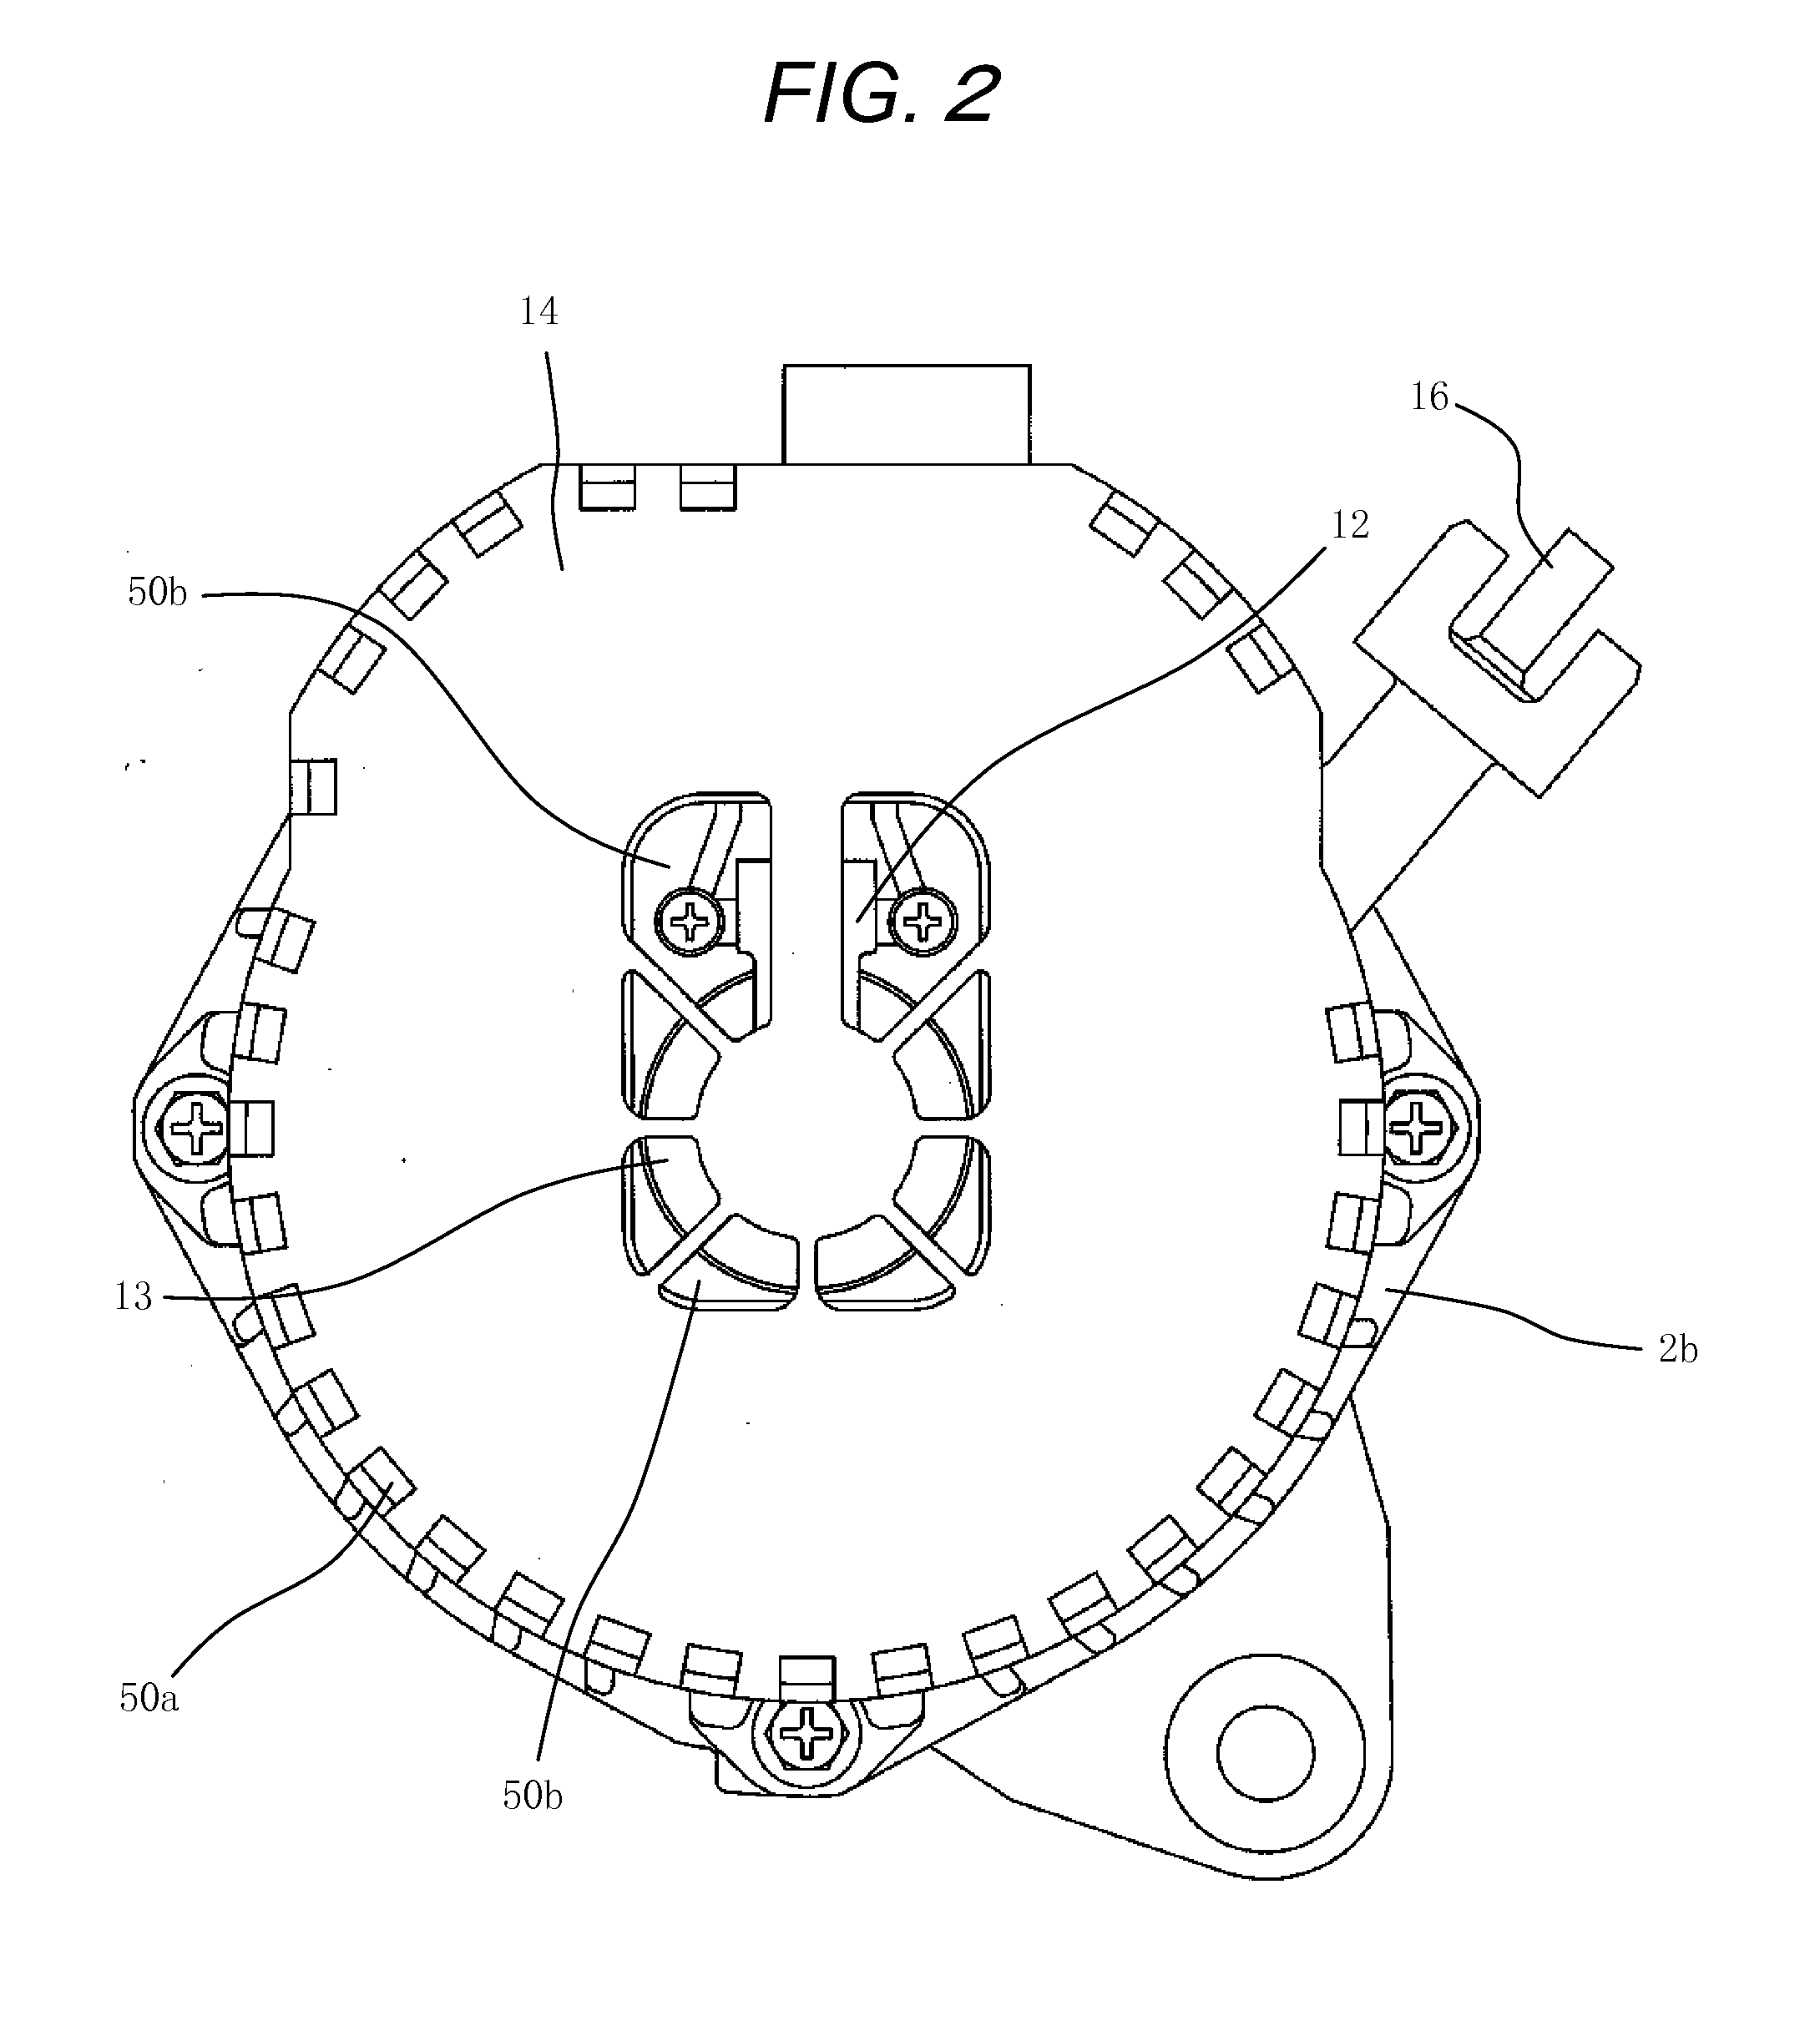 Controller-integrated rotating electrical machine